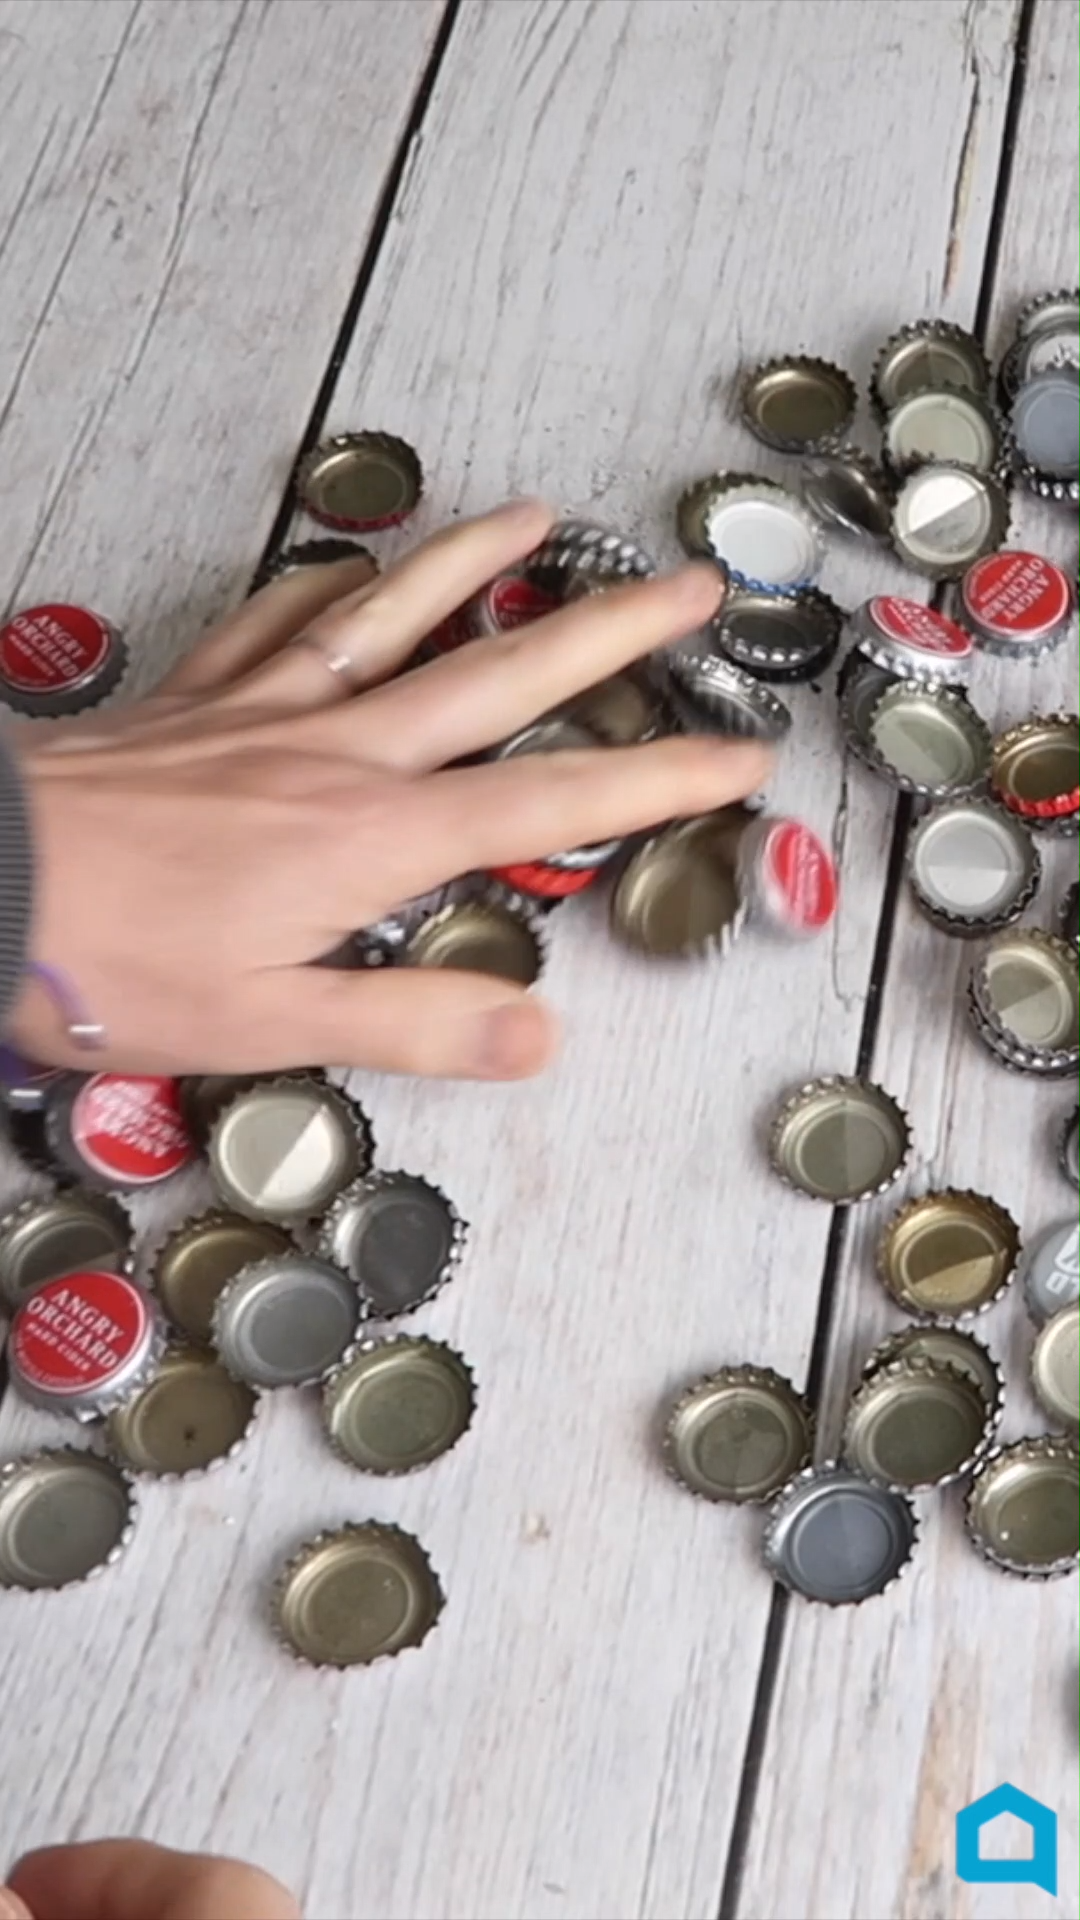 Looking To Upcycle Your Bottle Caps? - Looking To Upcycle Your Bottle Caps? -   21 diy Table upcycle ideas